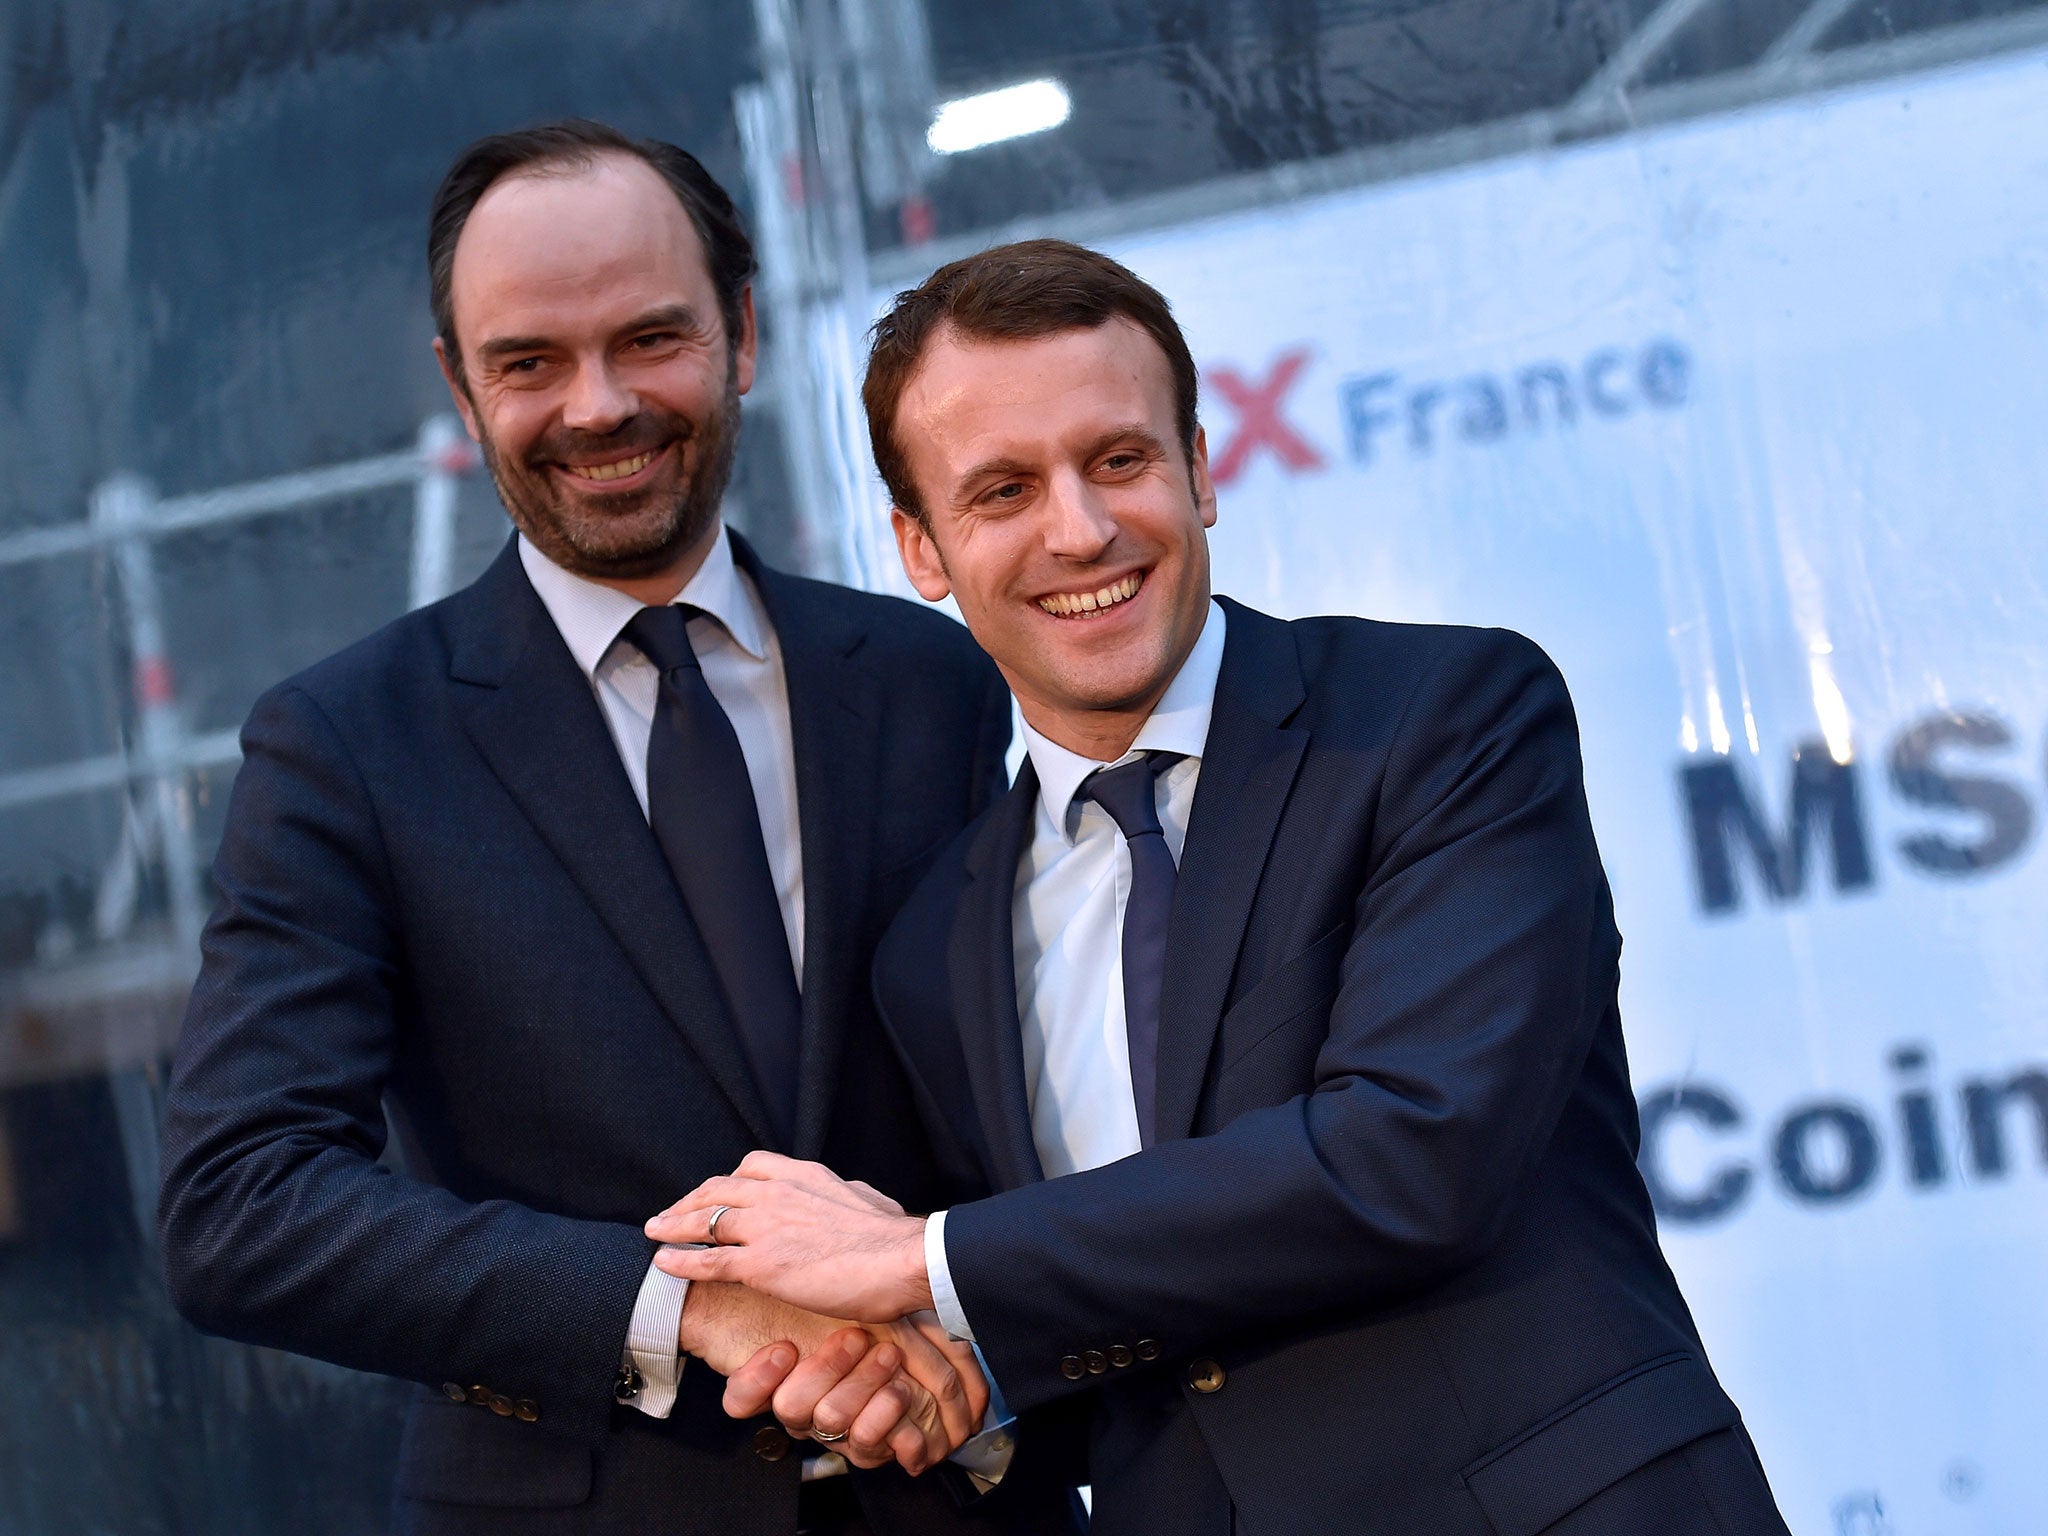 Photo from 1 February, 2016 shows French Economy Minister Emmanuel Macron (R) shaking hands with mayor of Le Havres Edouard Philippe